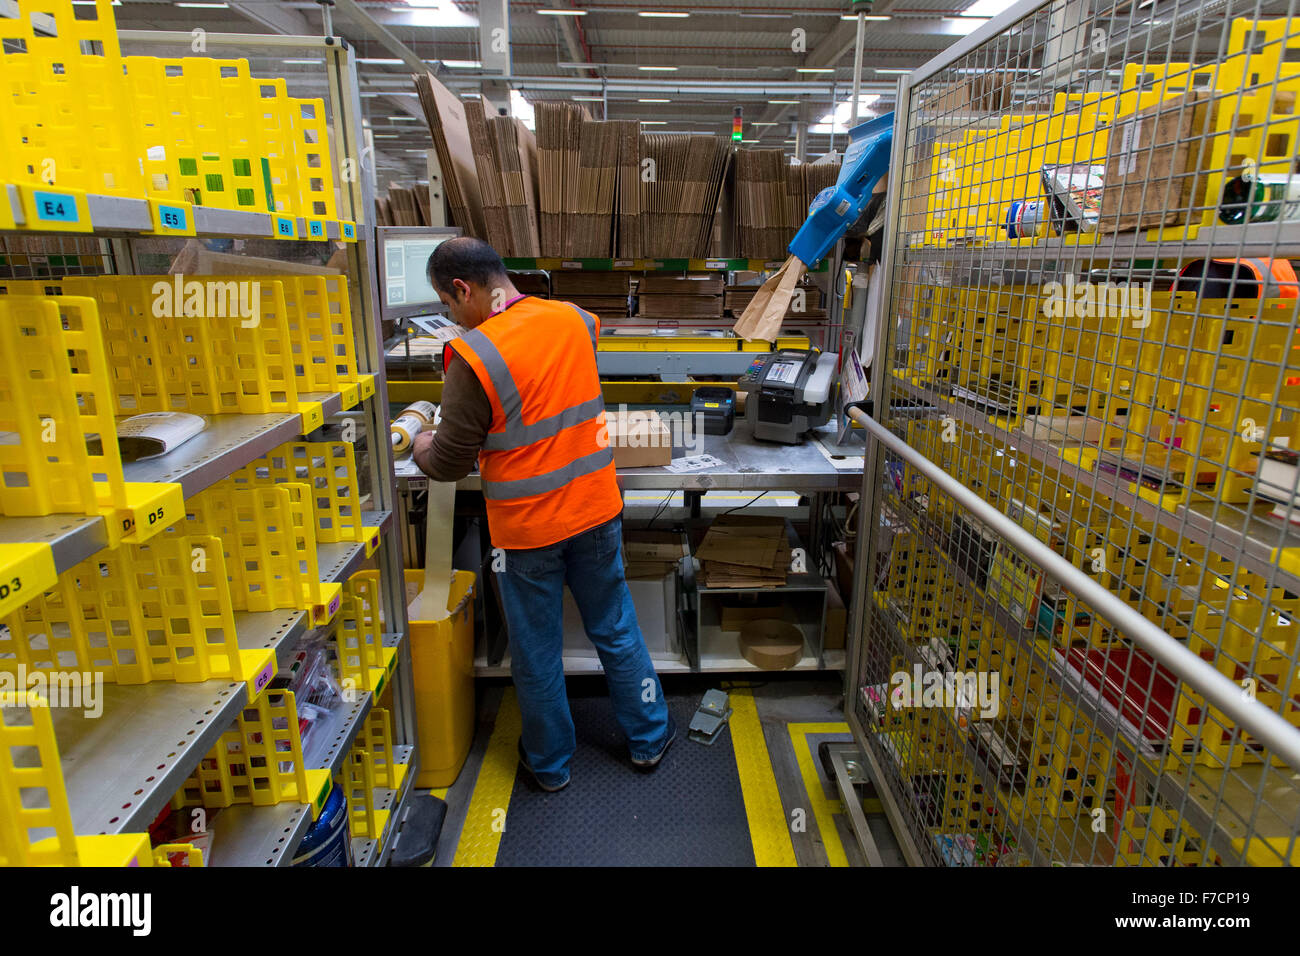 Stock pickers in the Amazon Fulfillment Centre warehouse in Swansea, Wales. Extra staff are hired on Cyber Monday & Black Friday Stock Photo